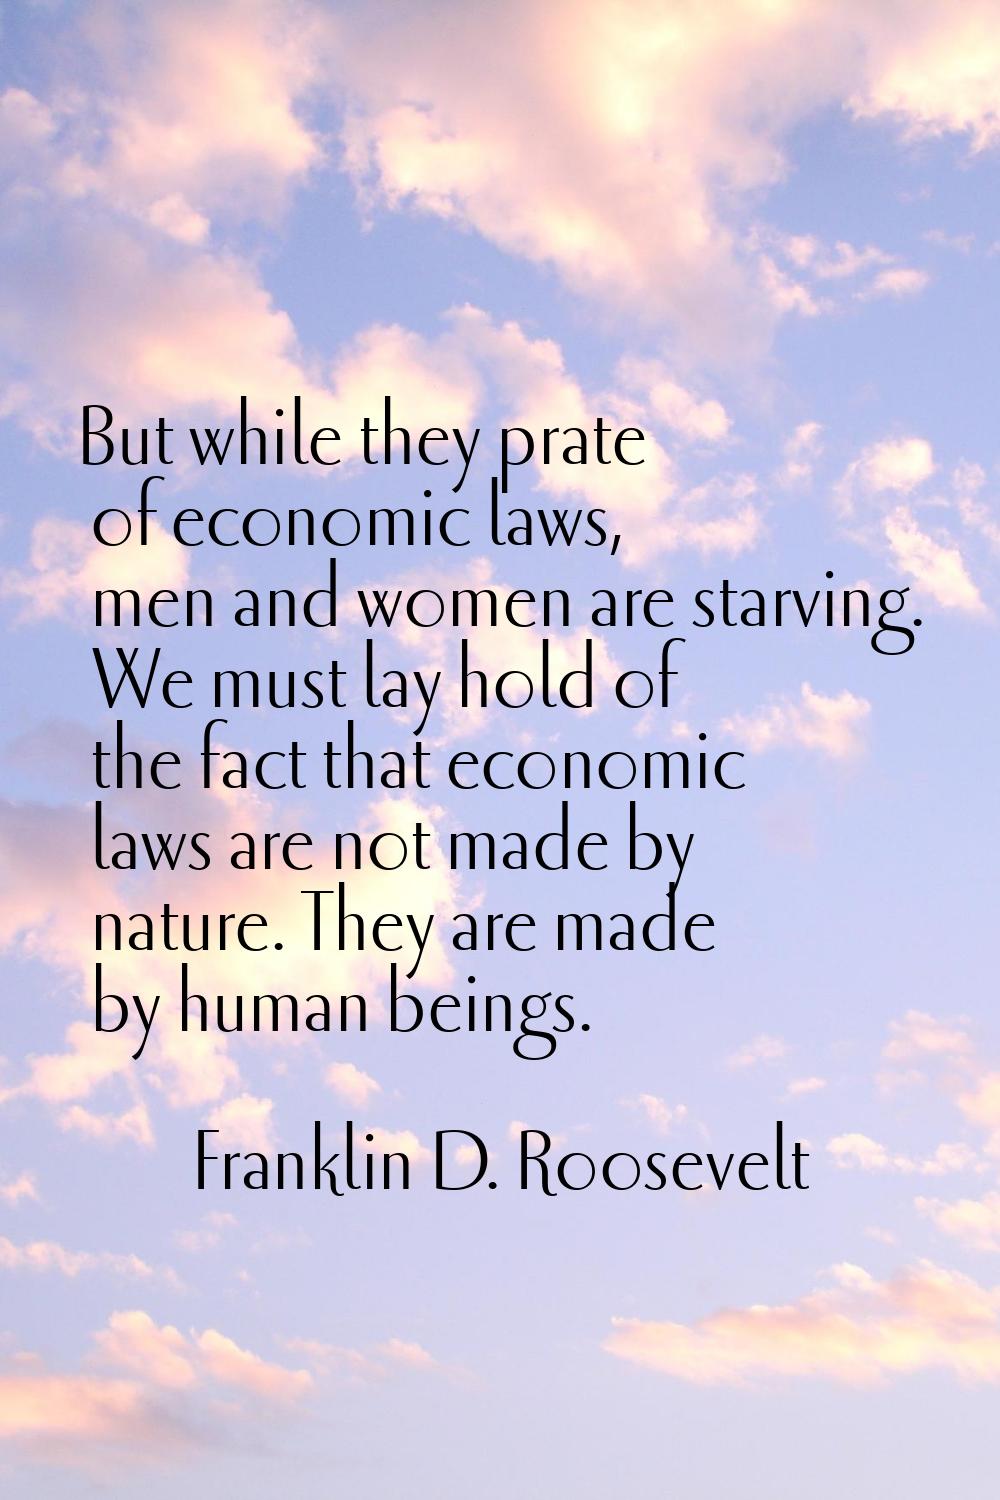 But while they prate of economic laws, men and women are starving. We must lay hold of the fact tha